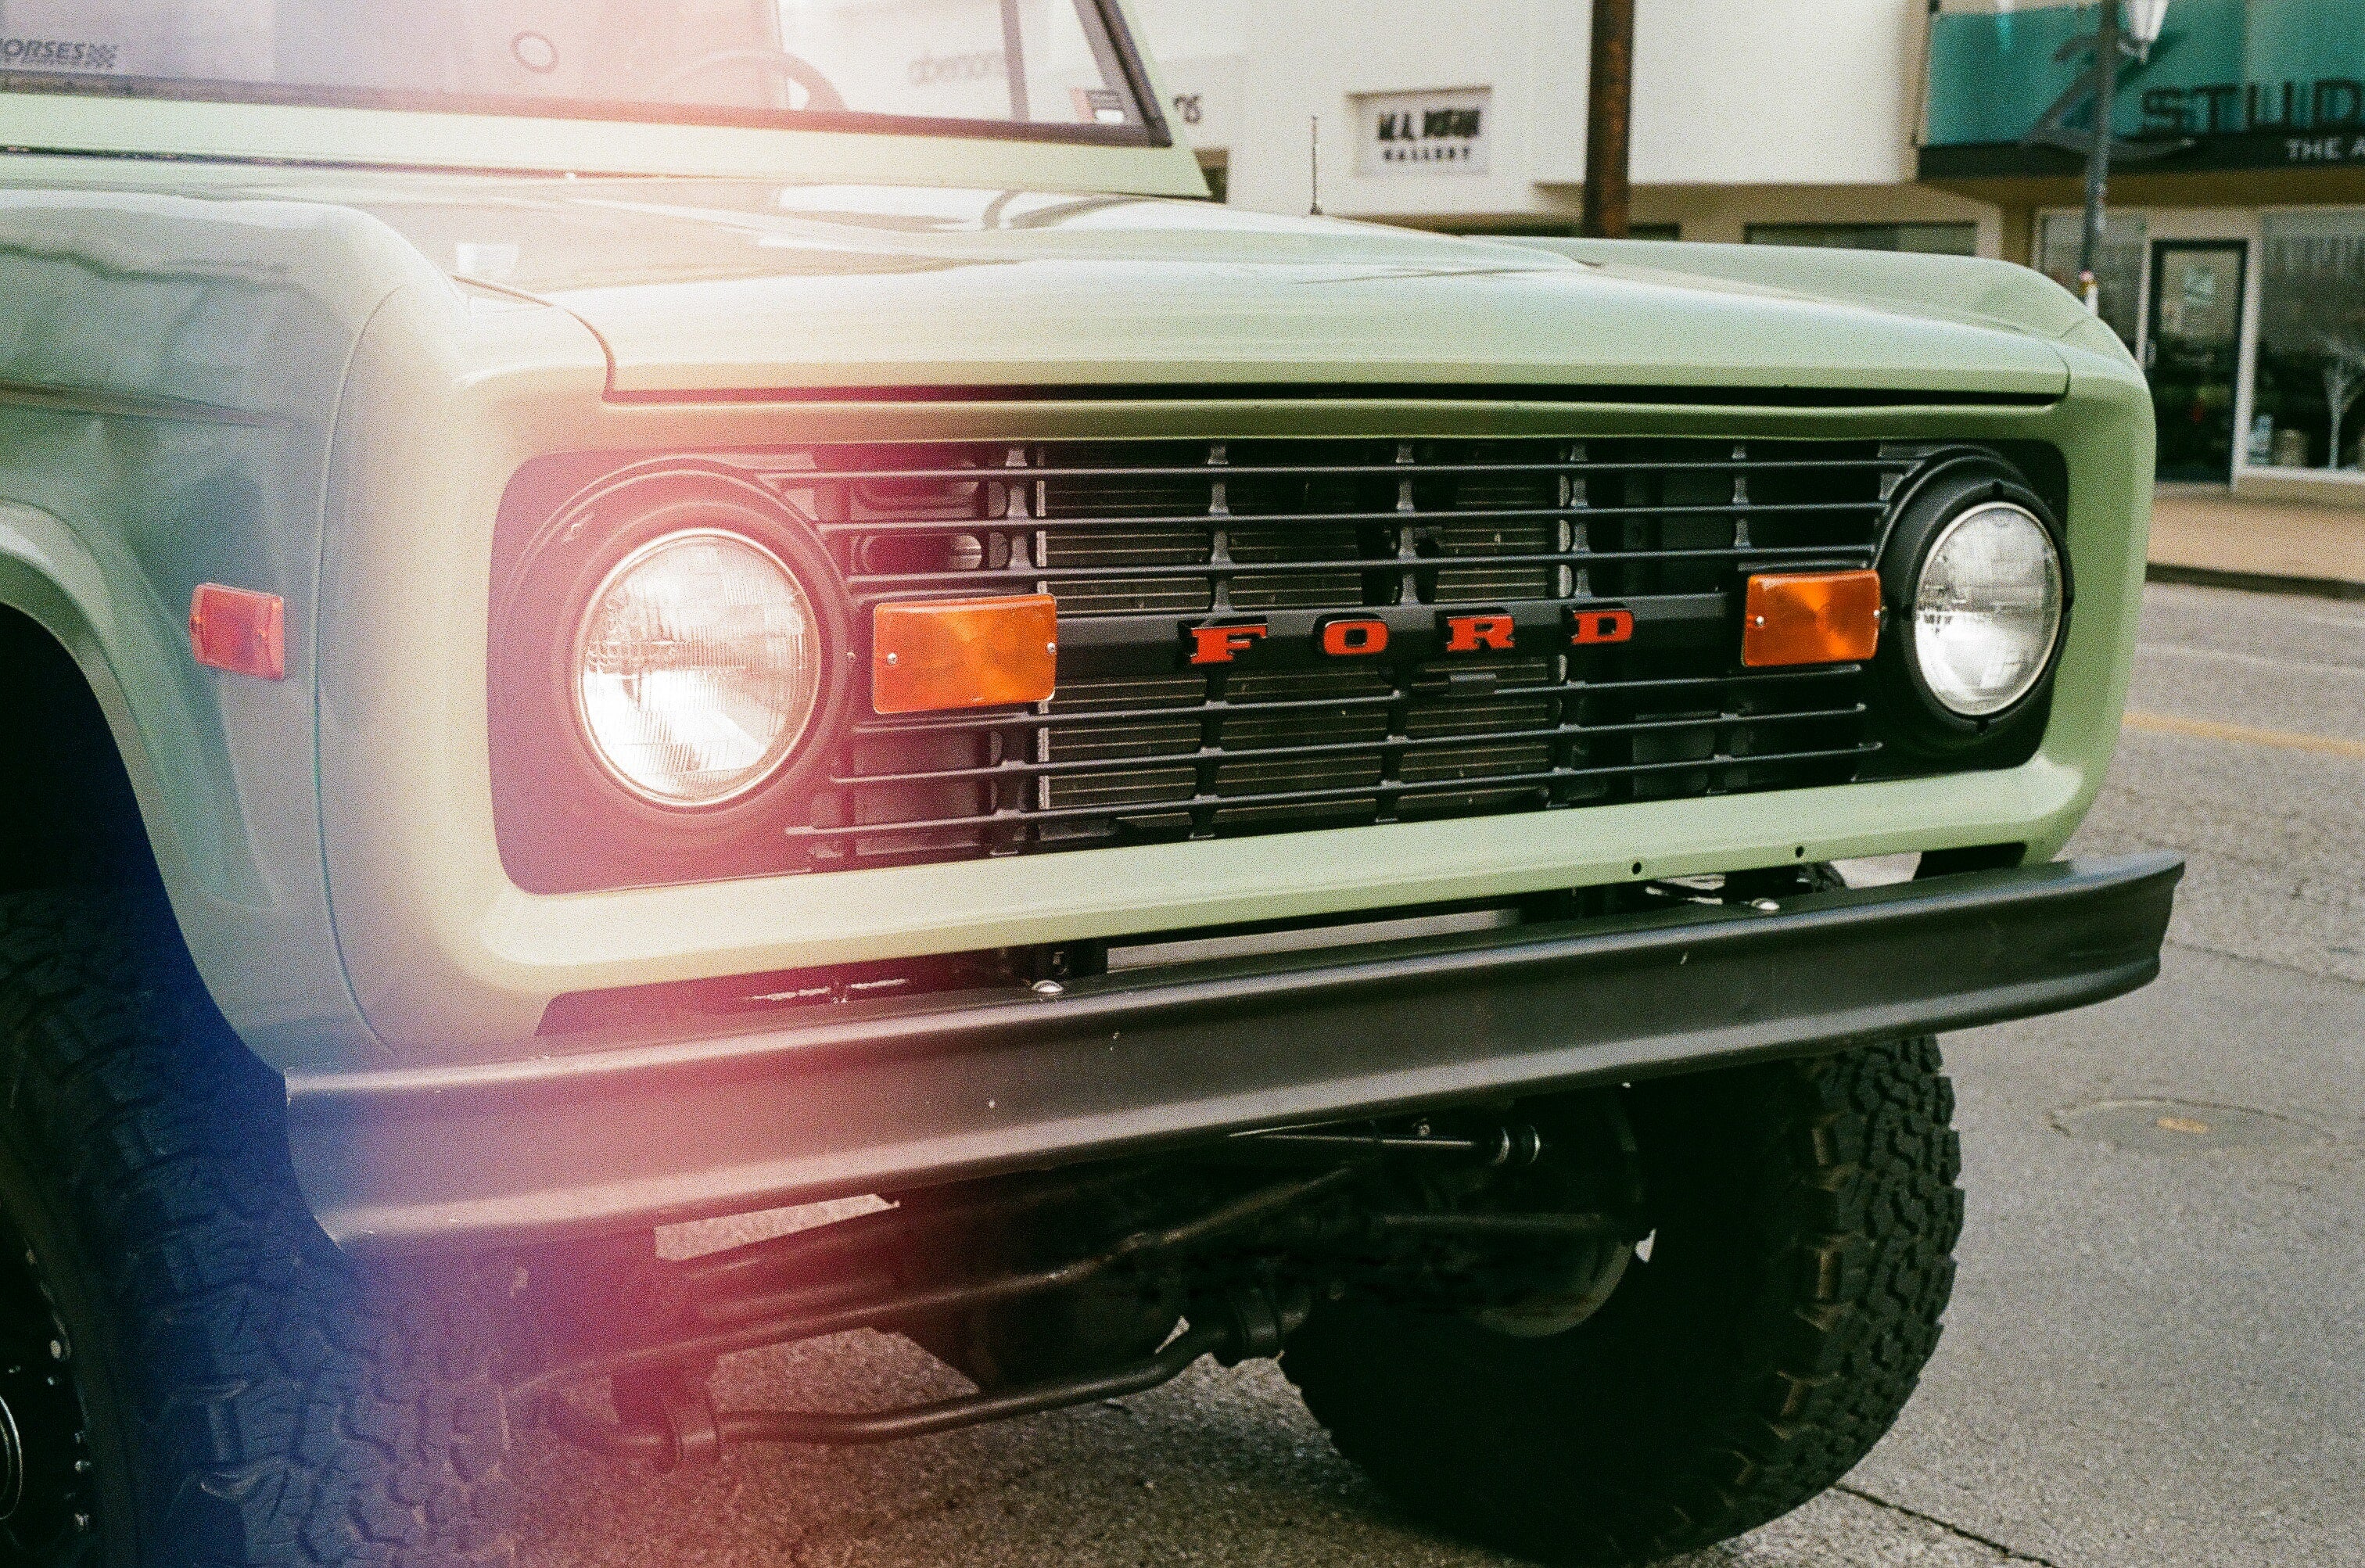 Get Your Ford Bronco Suspension Parts Today - Limited Stock!